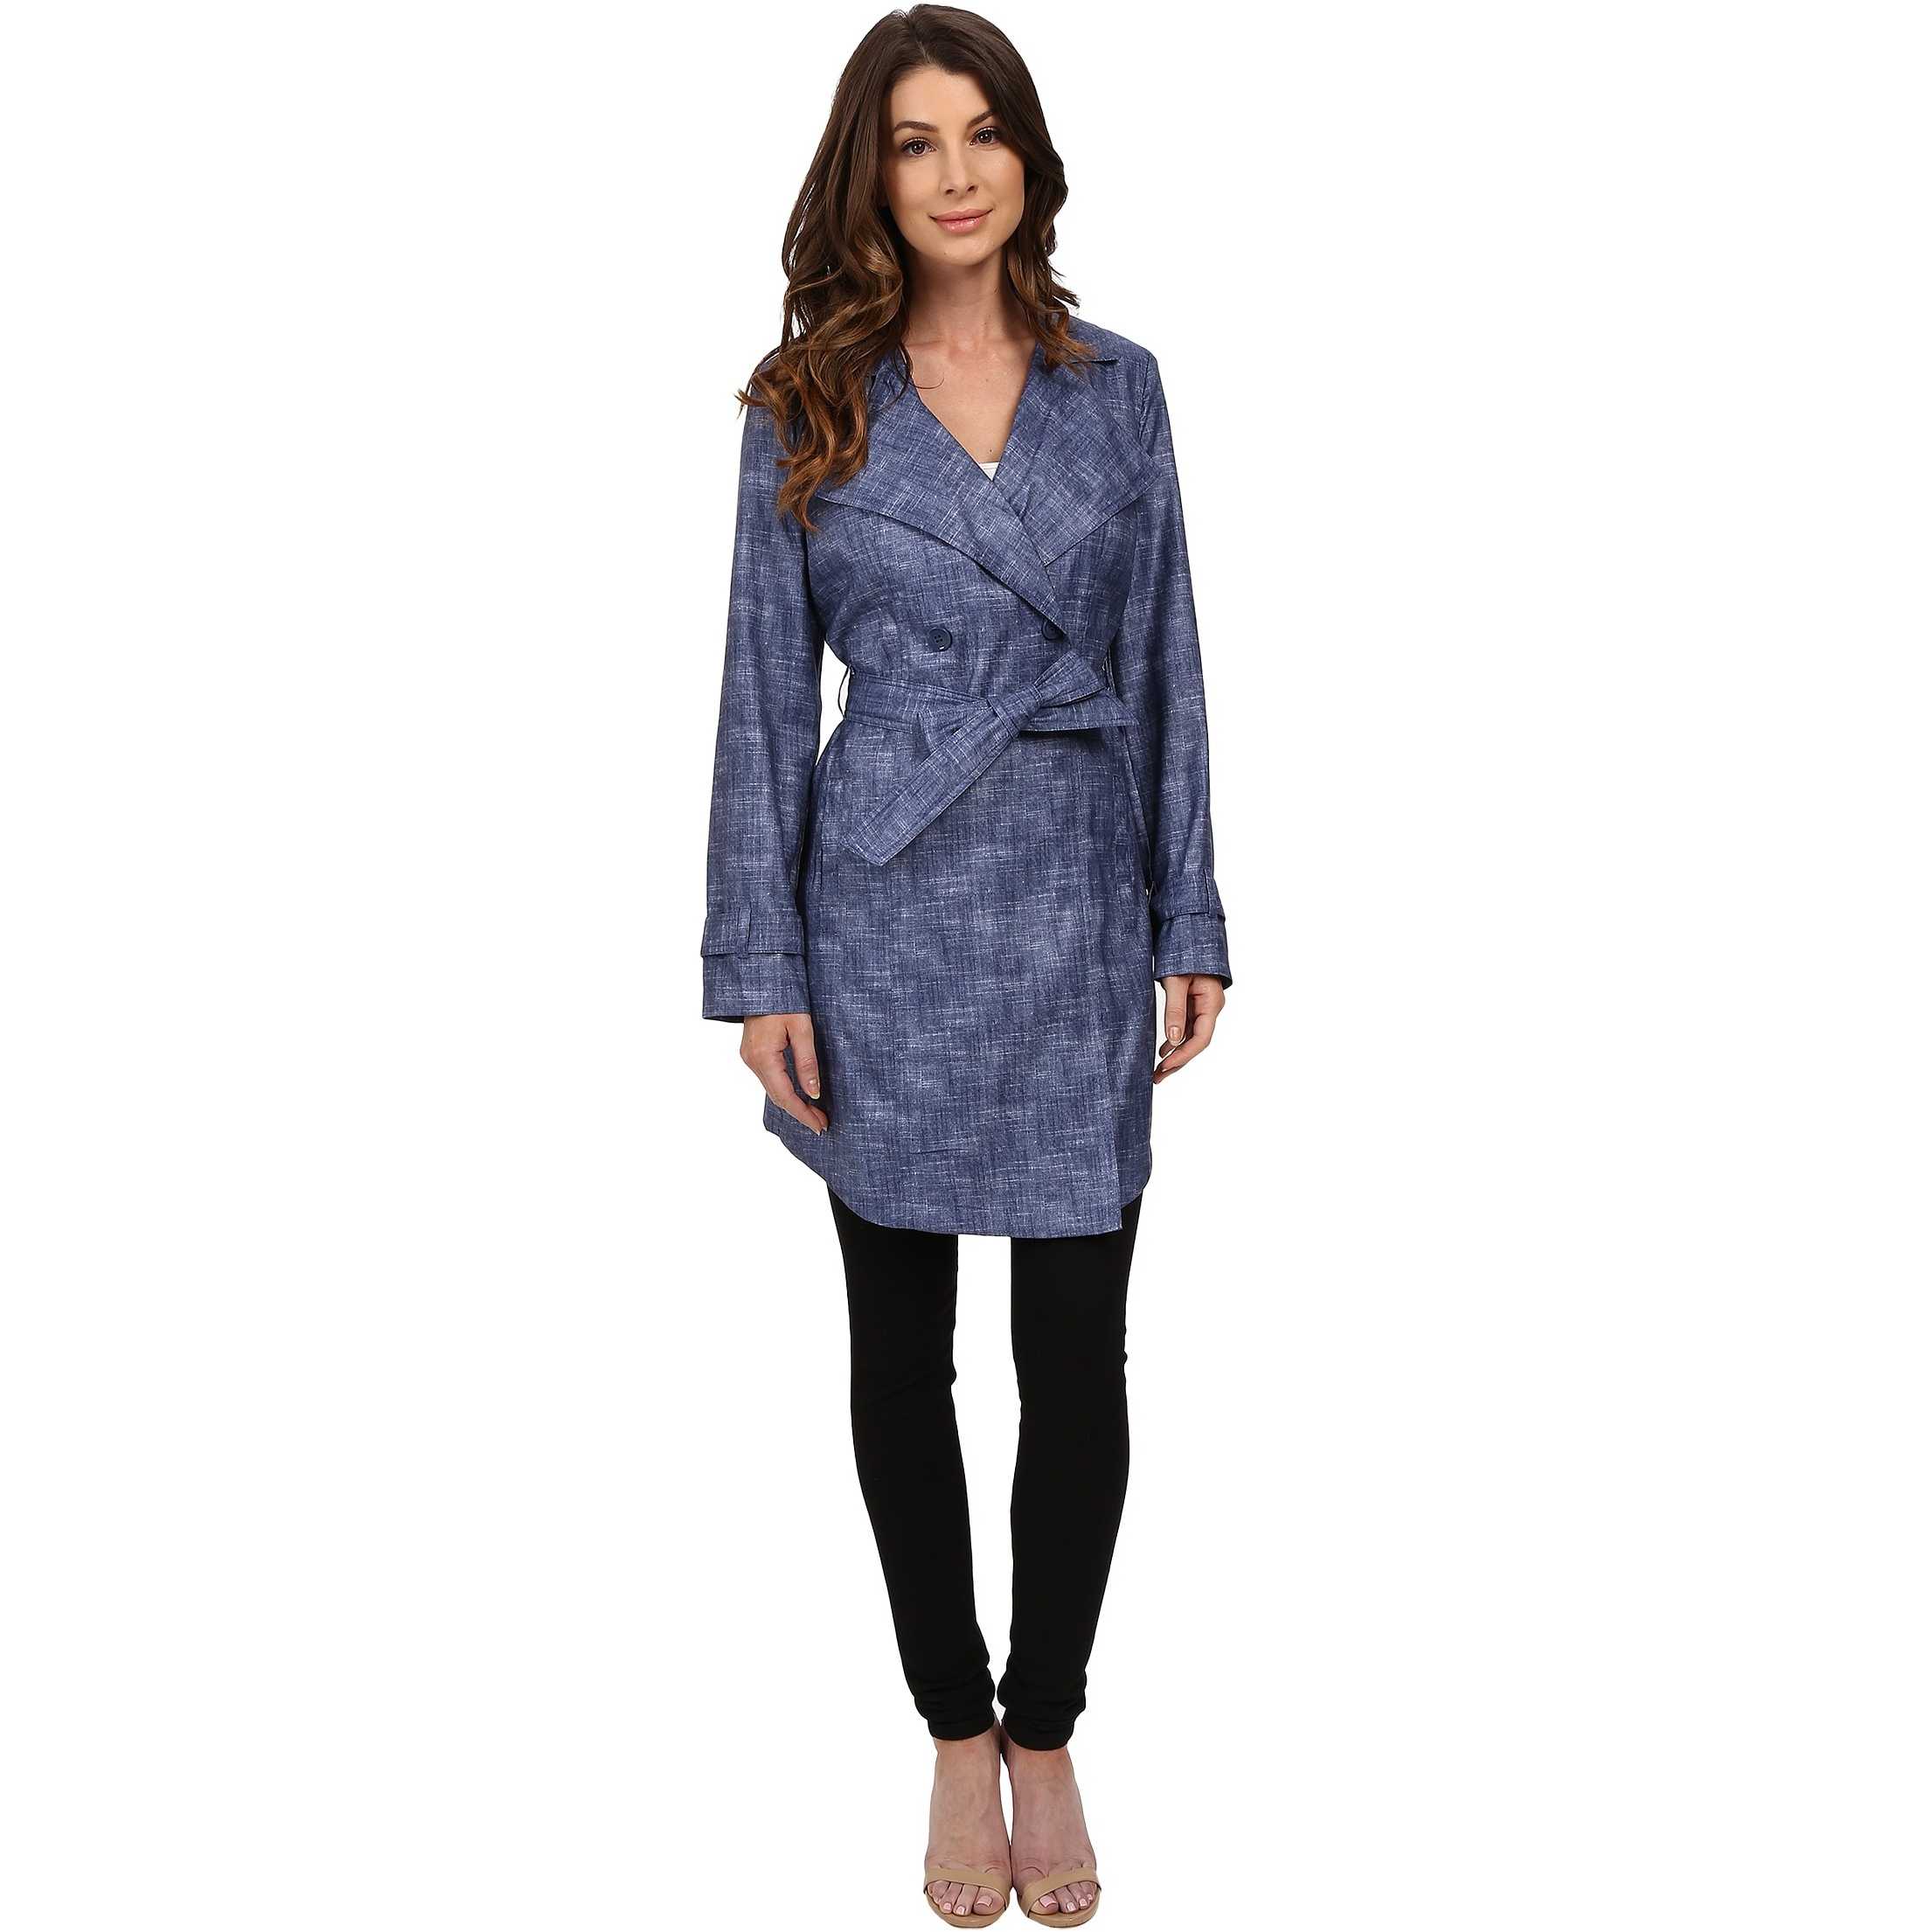 Kenneth Cole New York Printed Trench Coat Cadet Blue trench dama